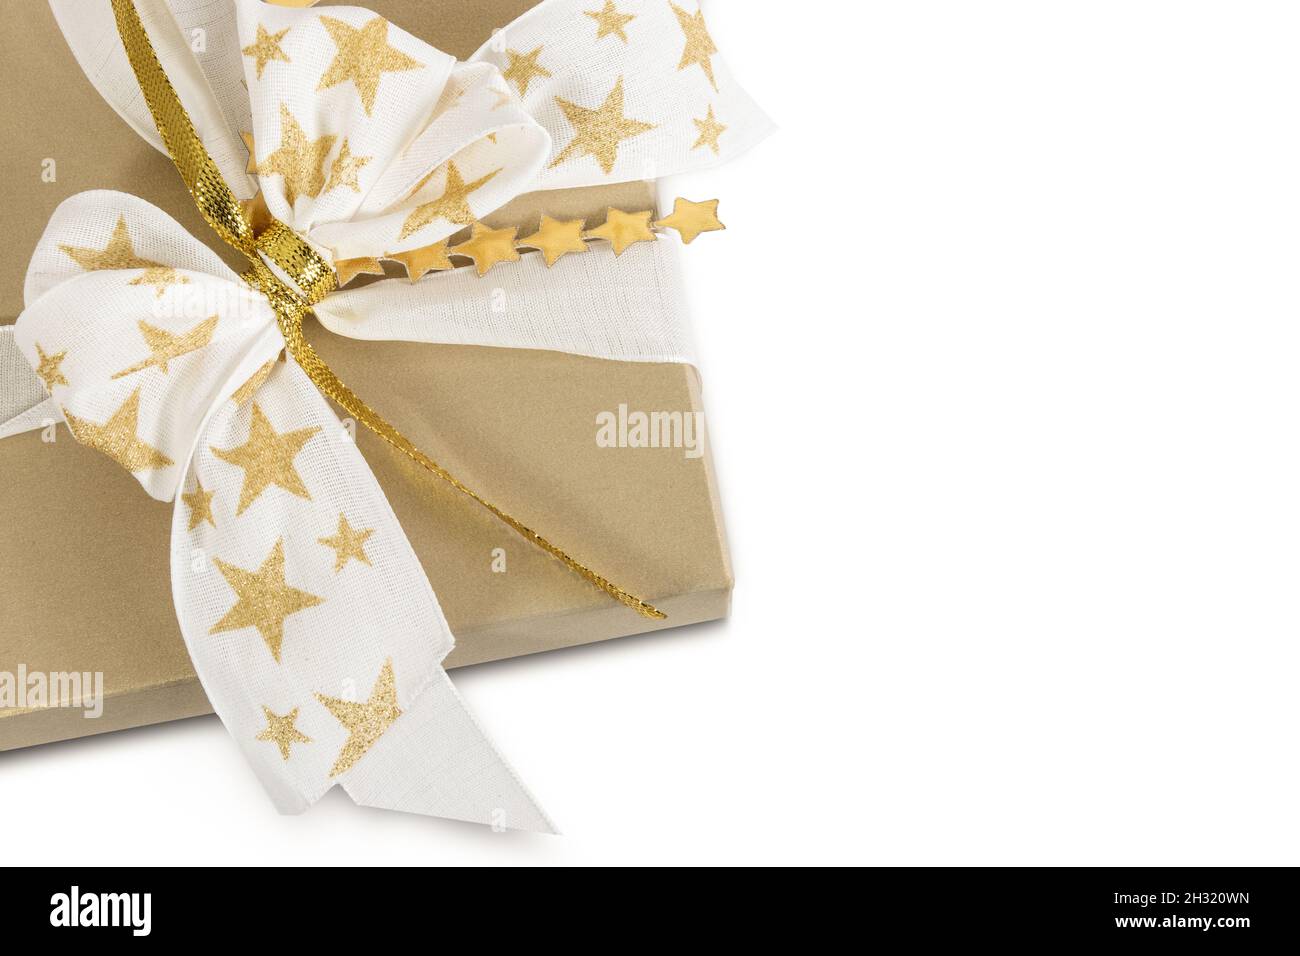 Golden gift box decorated with stars on bow isolated on white background. Stock Photo